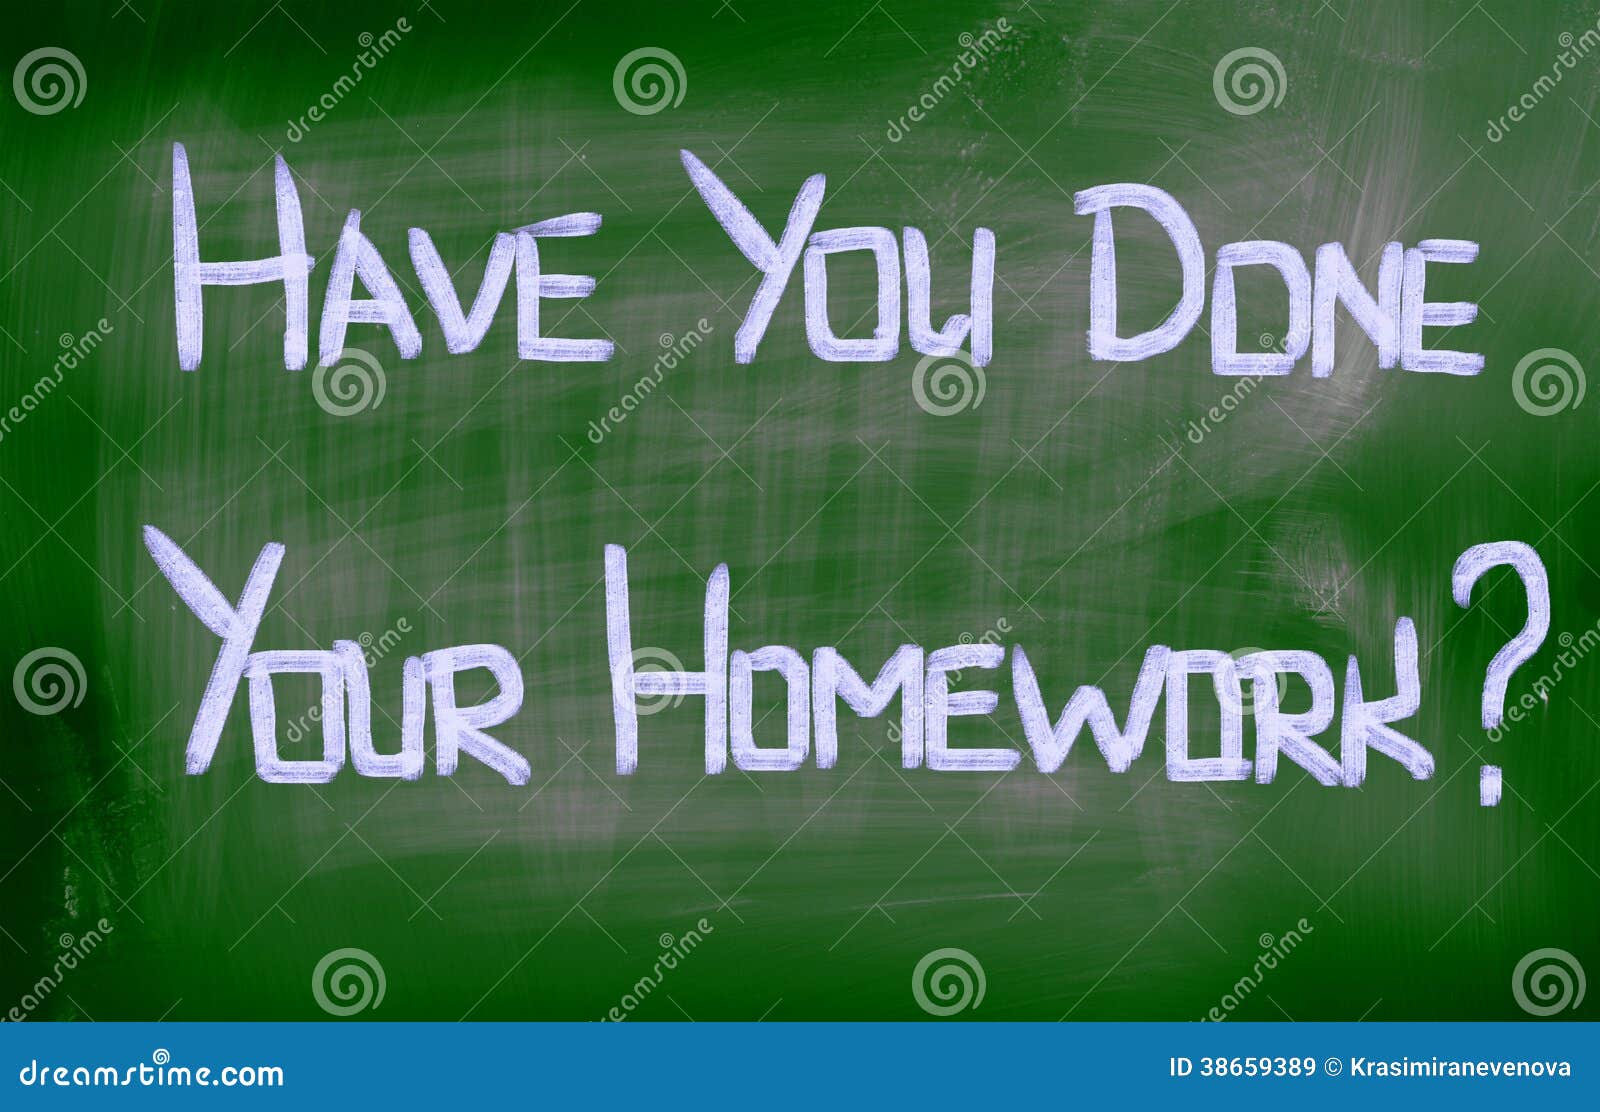 i have just done my homework